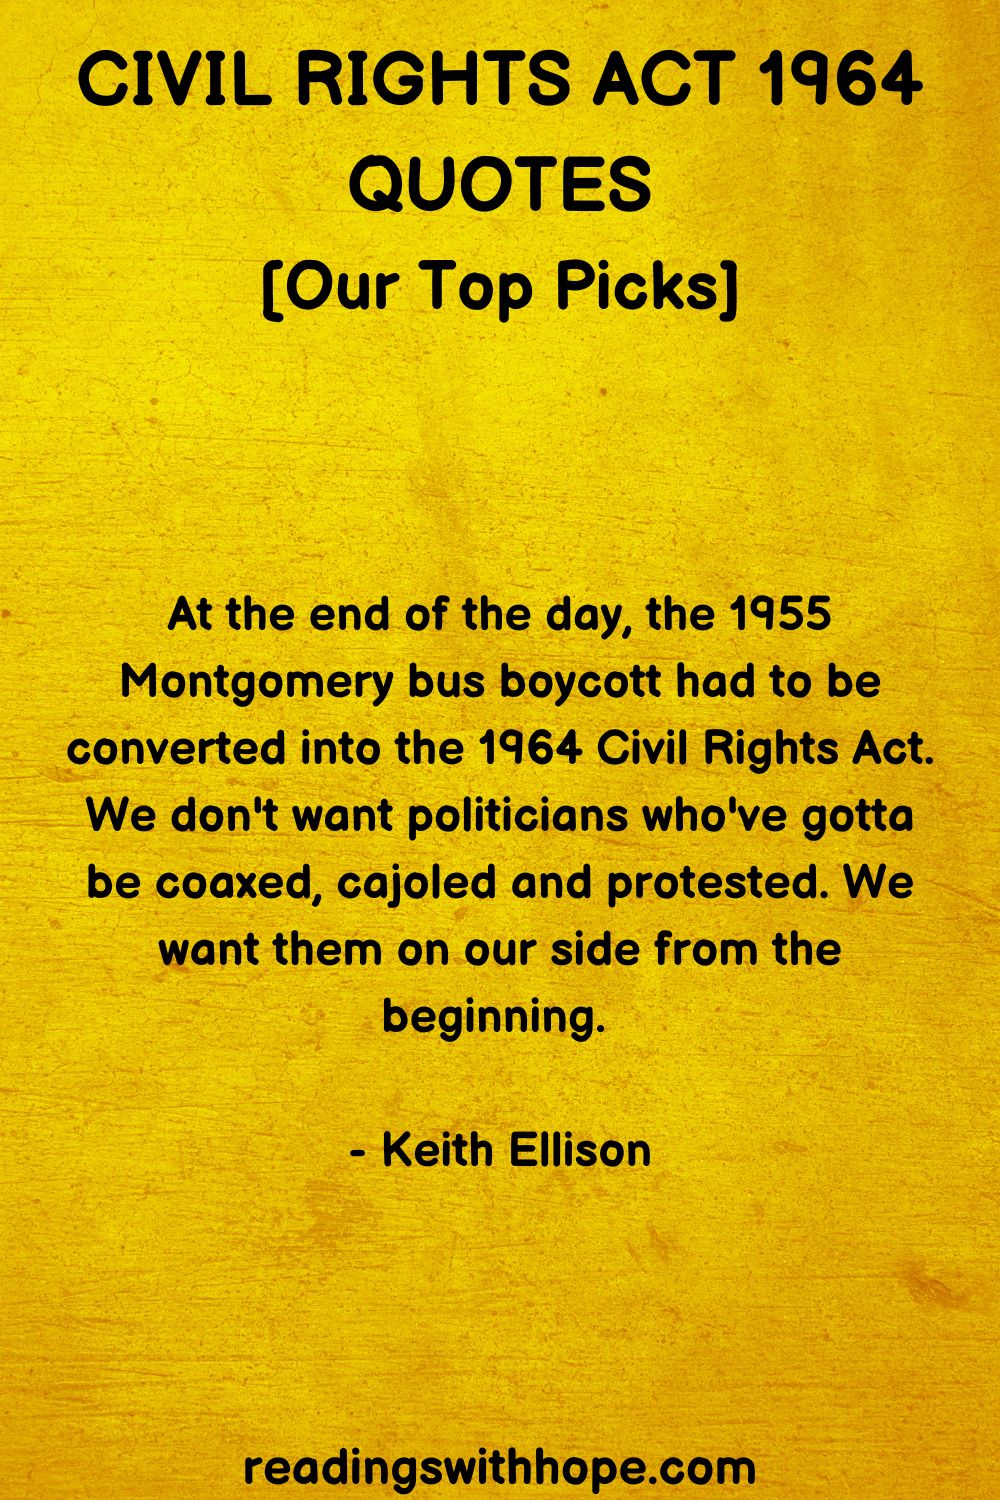 14 Civil Rights Act 1964 Quotes and What They Signify